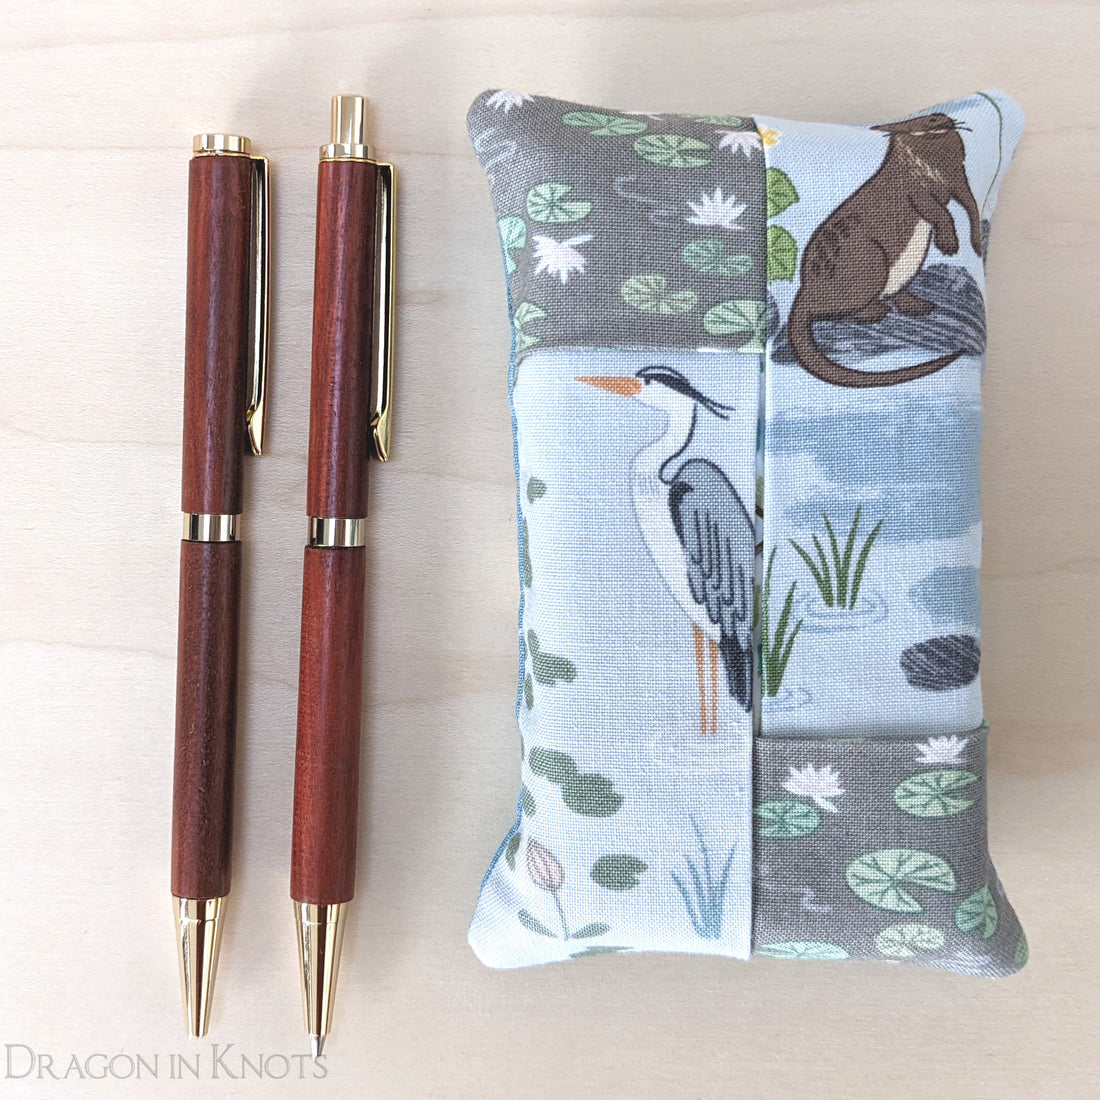 wooden pen and pencil next to a pocket tissue holder with a nature theme